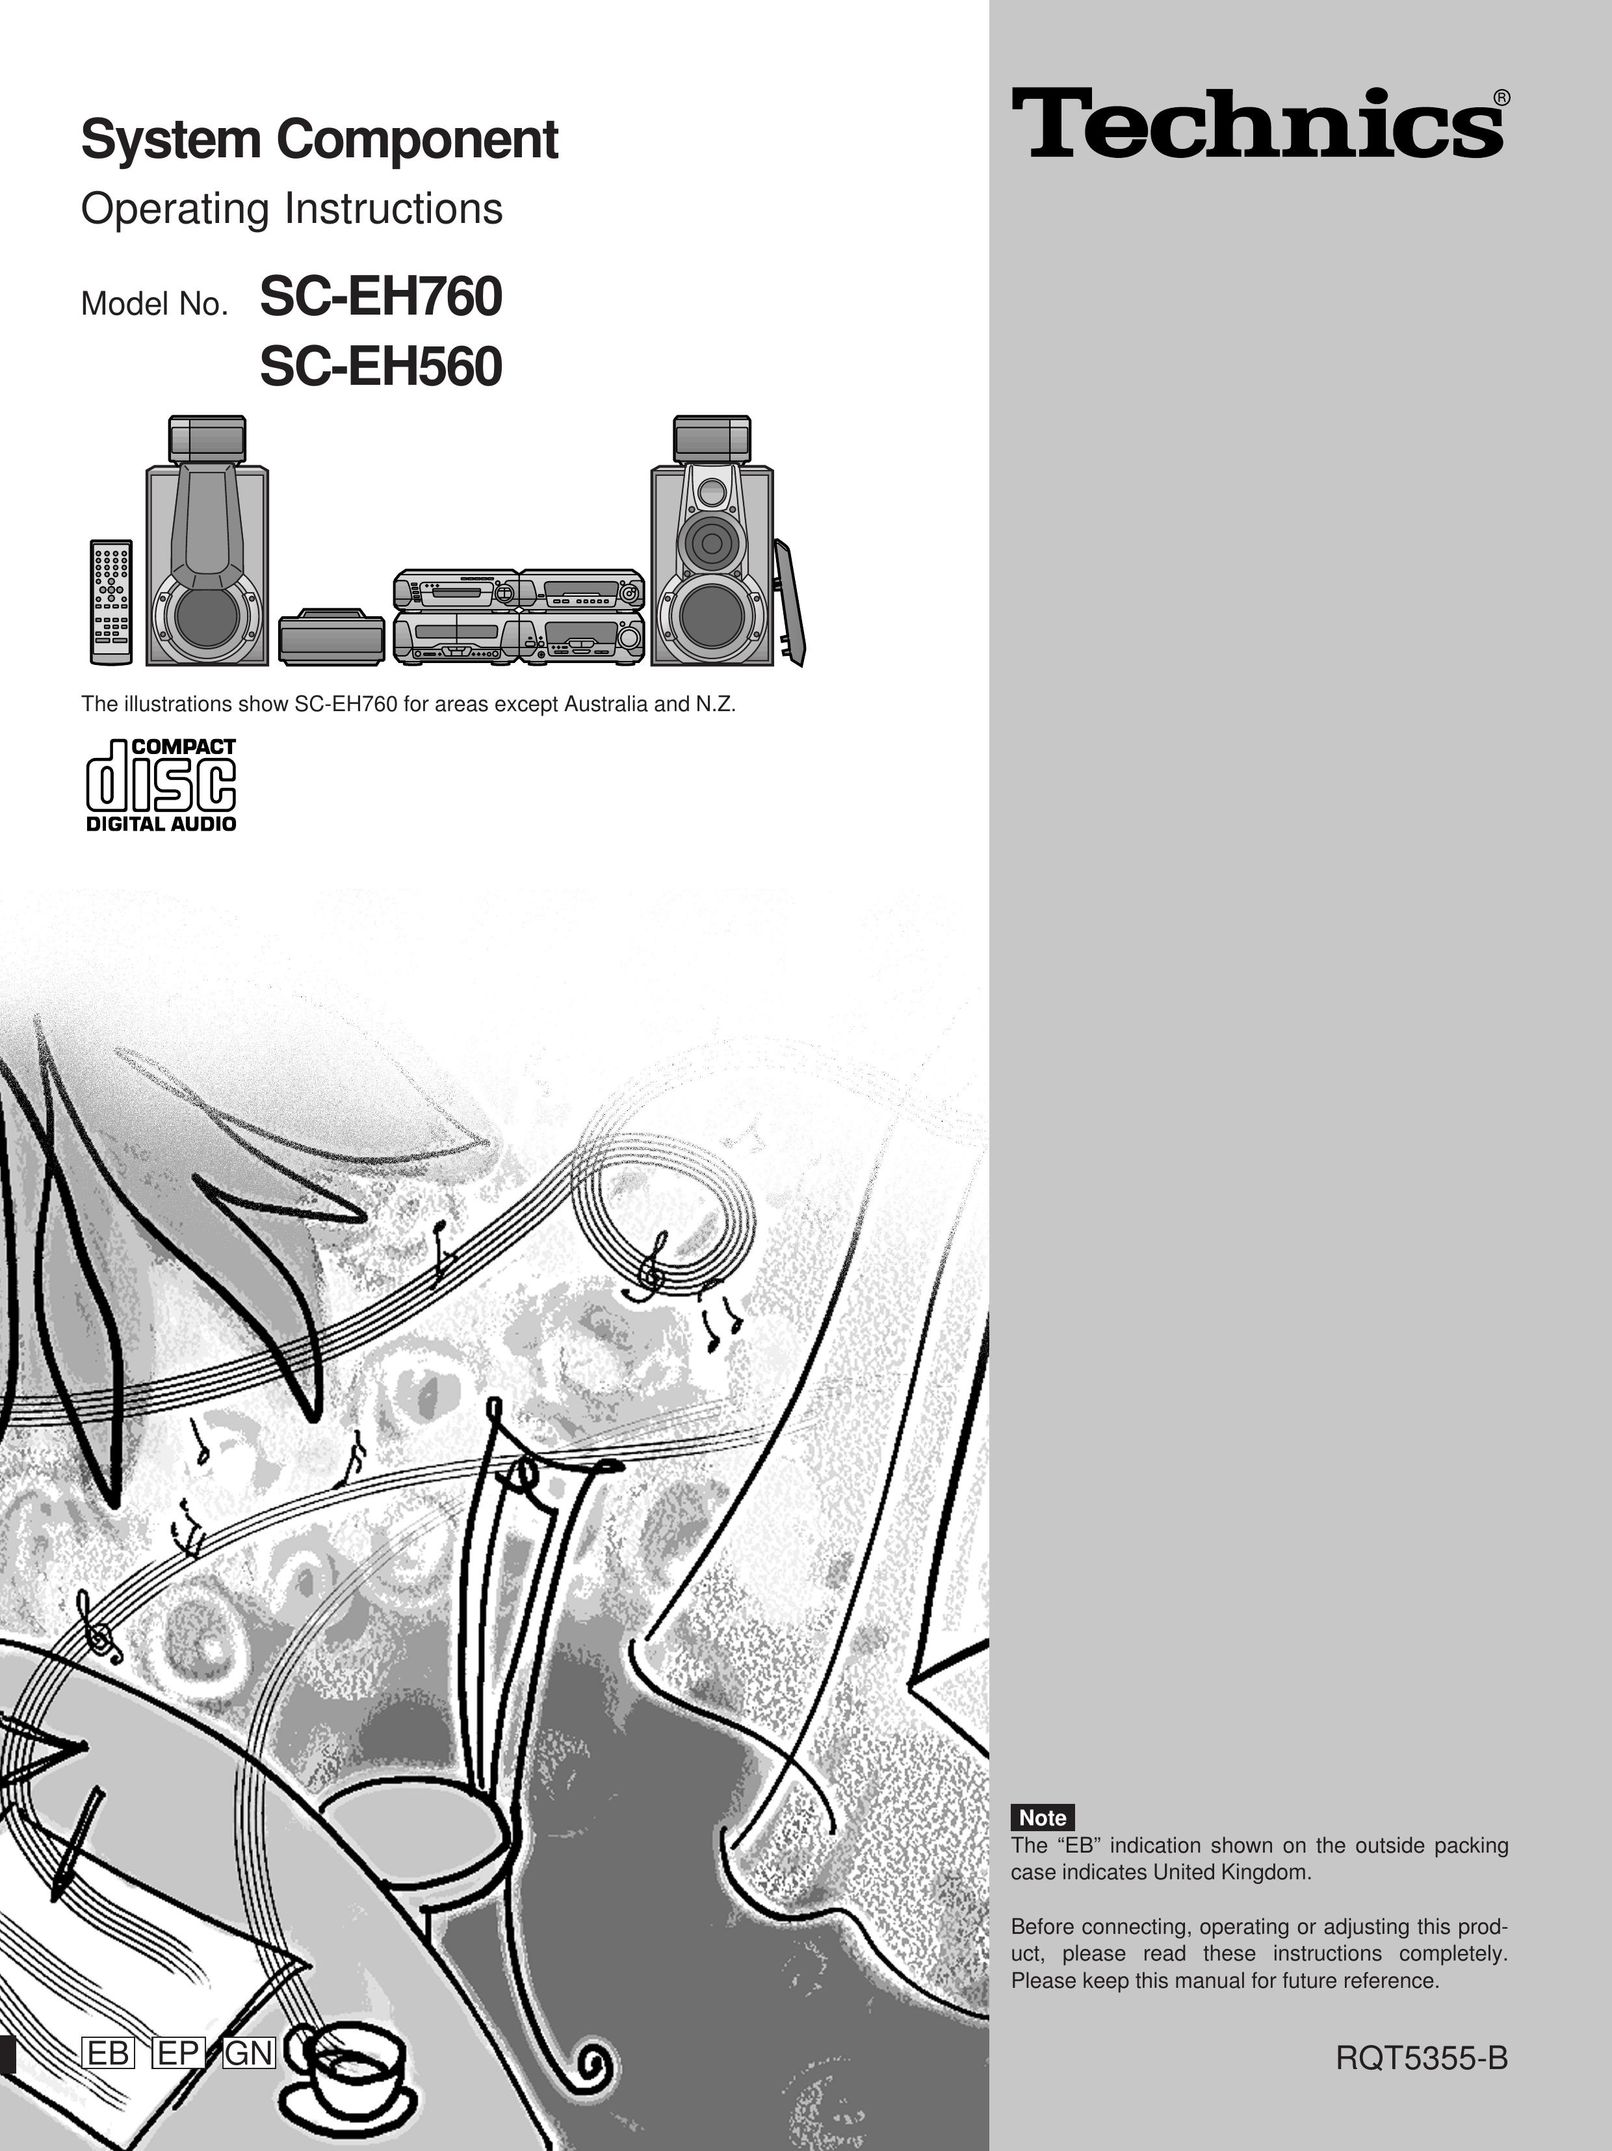 Technics SC-EH760 Home Theater System User Manual